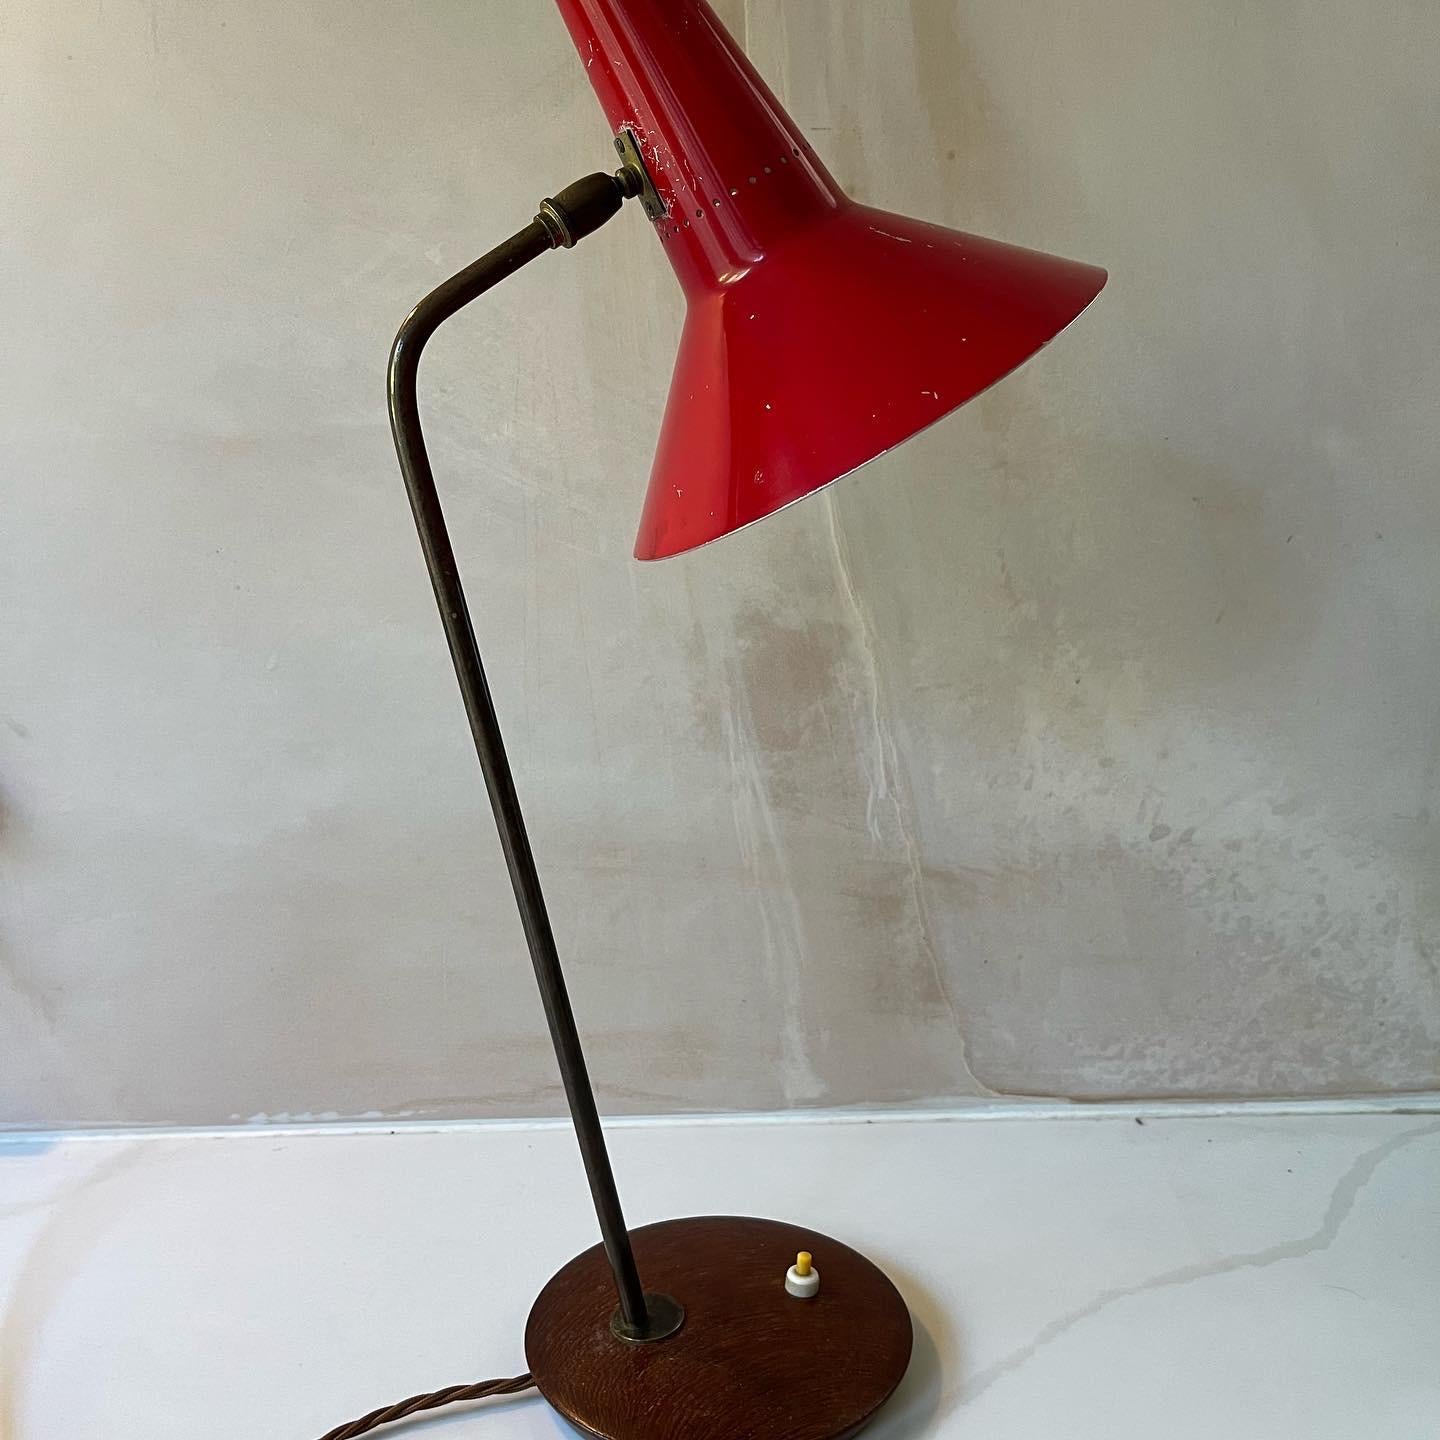 An English 1950’s red enamel and gilt metal desk lamp designed by Beverly Pick for GEC. A lovely example of good British midcentury modern design. Original paint with minor scuffs and paint loss. The brass has a good patination as does the wooden